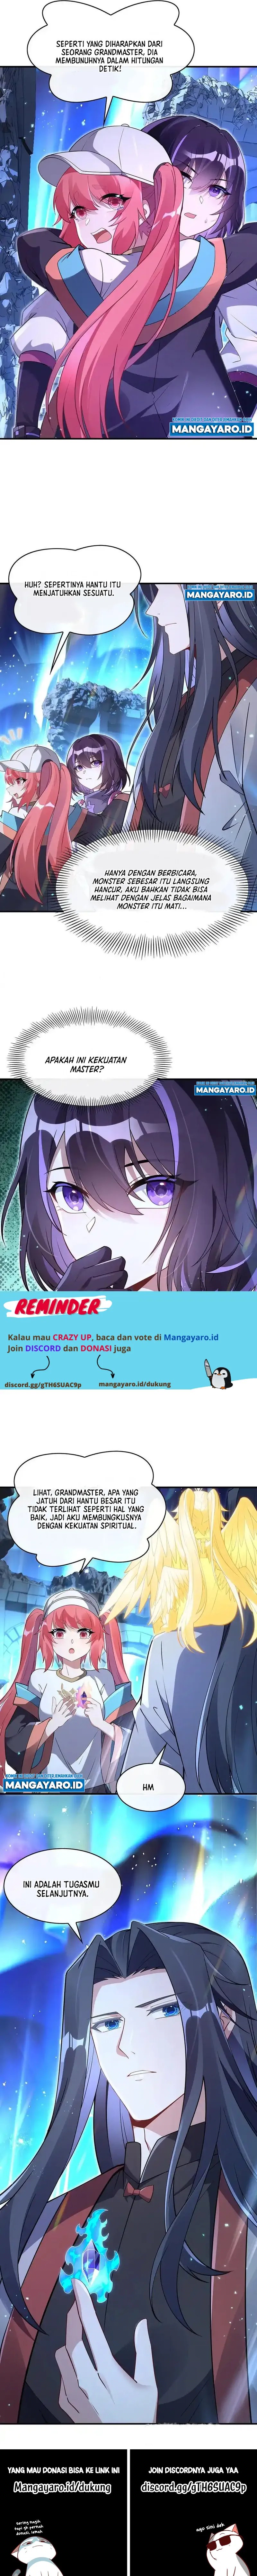 Dilarang COPAS - situs resmi www.mangacanblog.com - Komik my female apprentices are all big shots from the future 271 - chapter 271 272 Indonesia my female apprentices are all big shots from the future 271 - chapter 271 Terbaru 8|Baca Manga Komik Indonesia|Mangacan